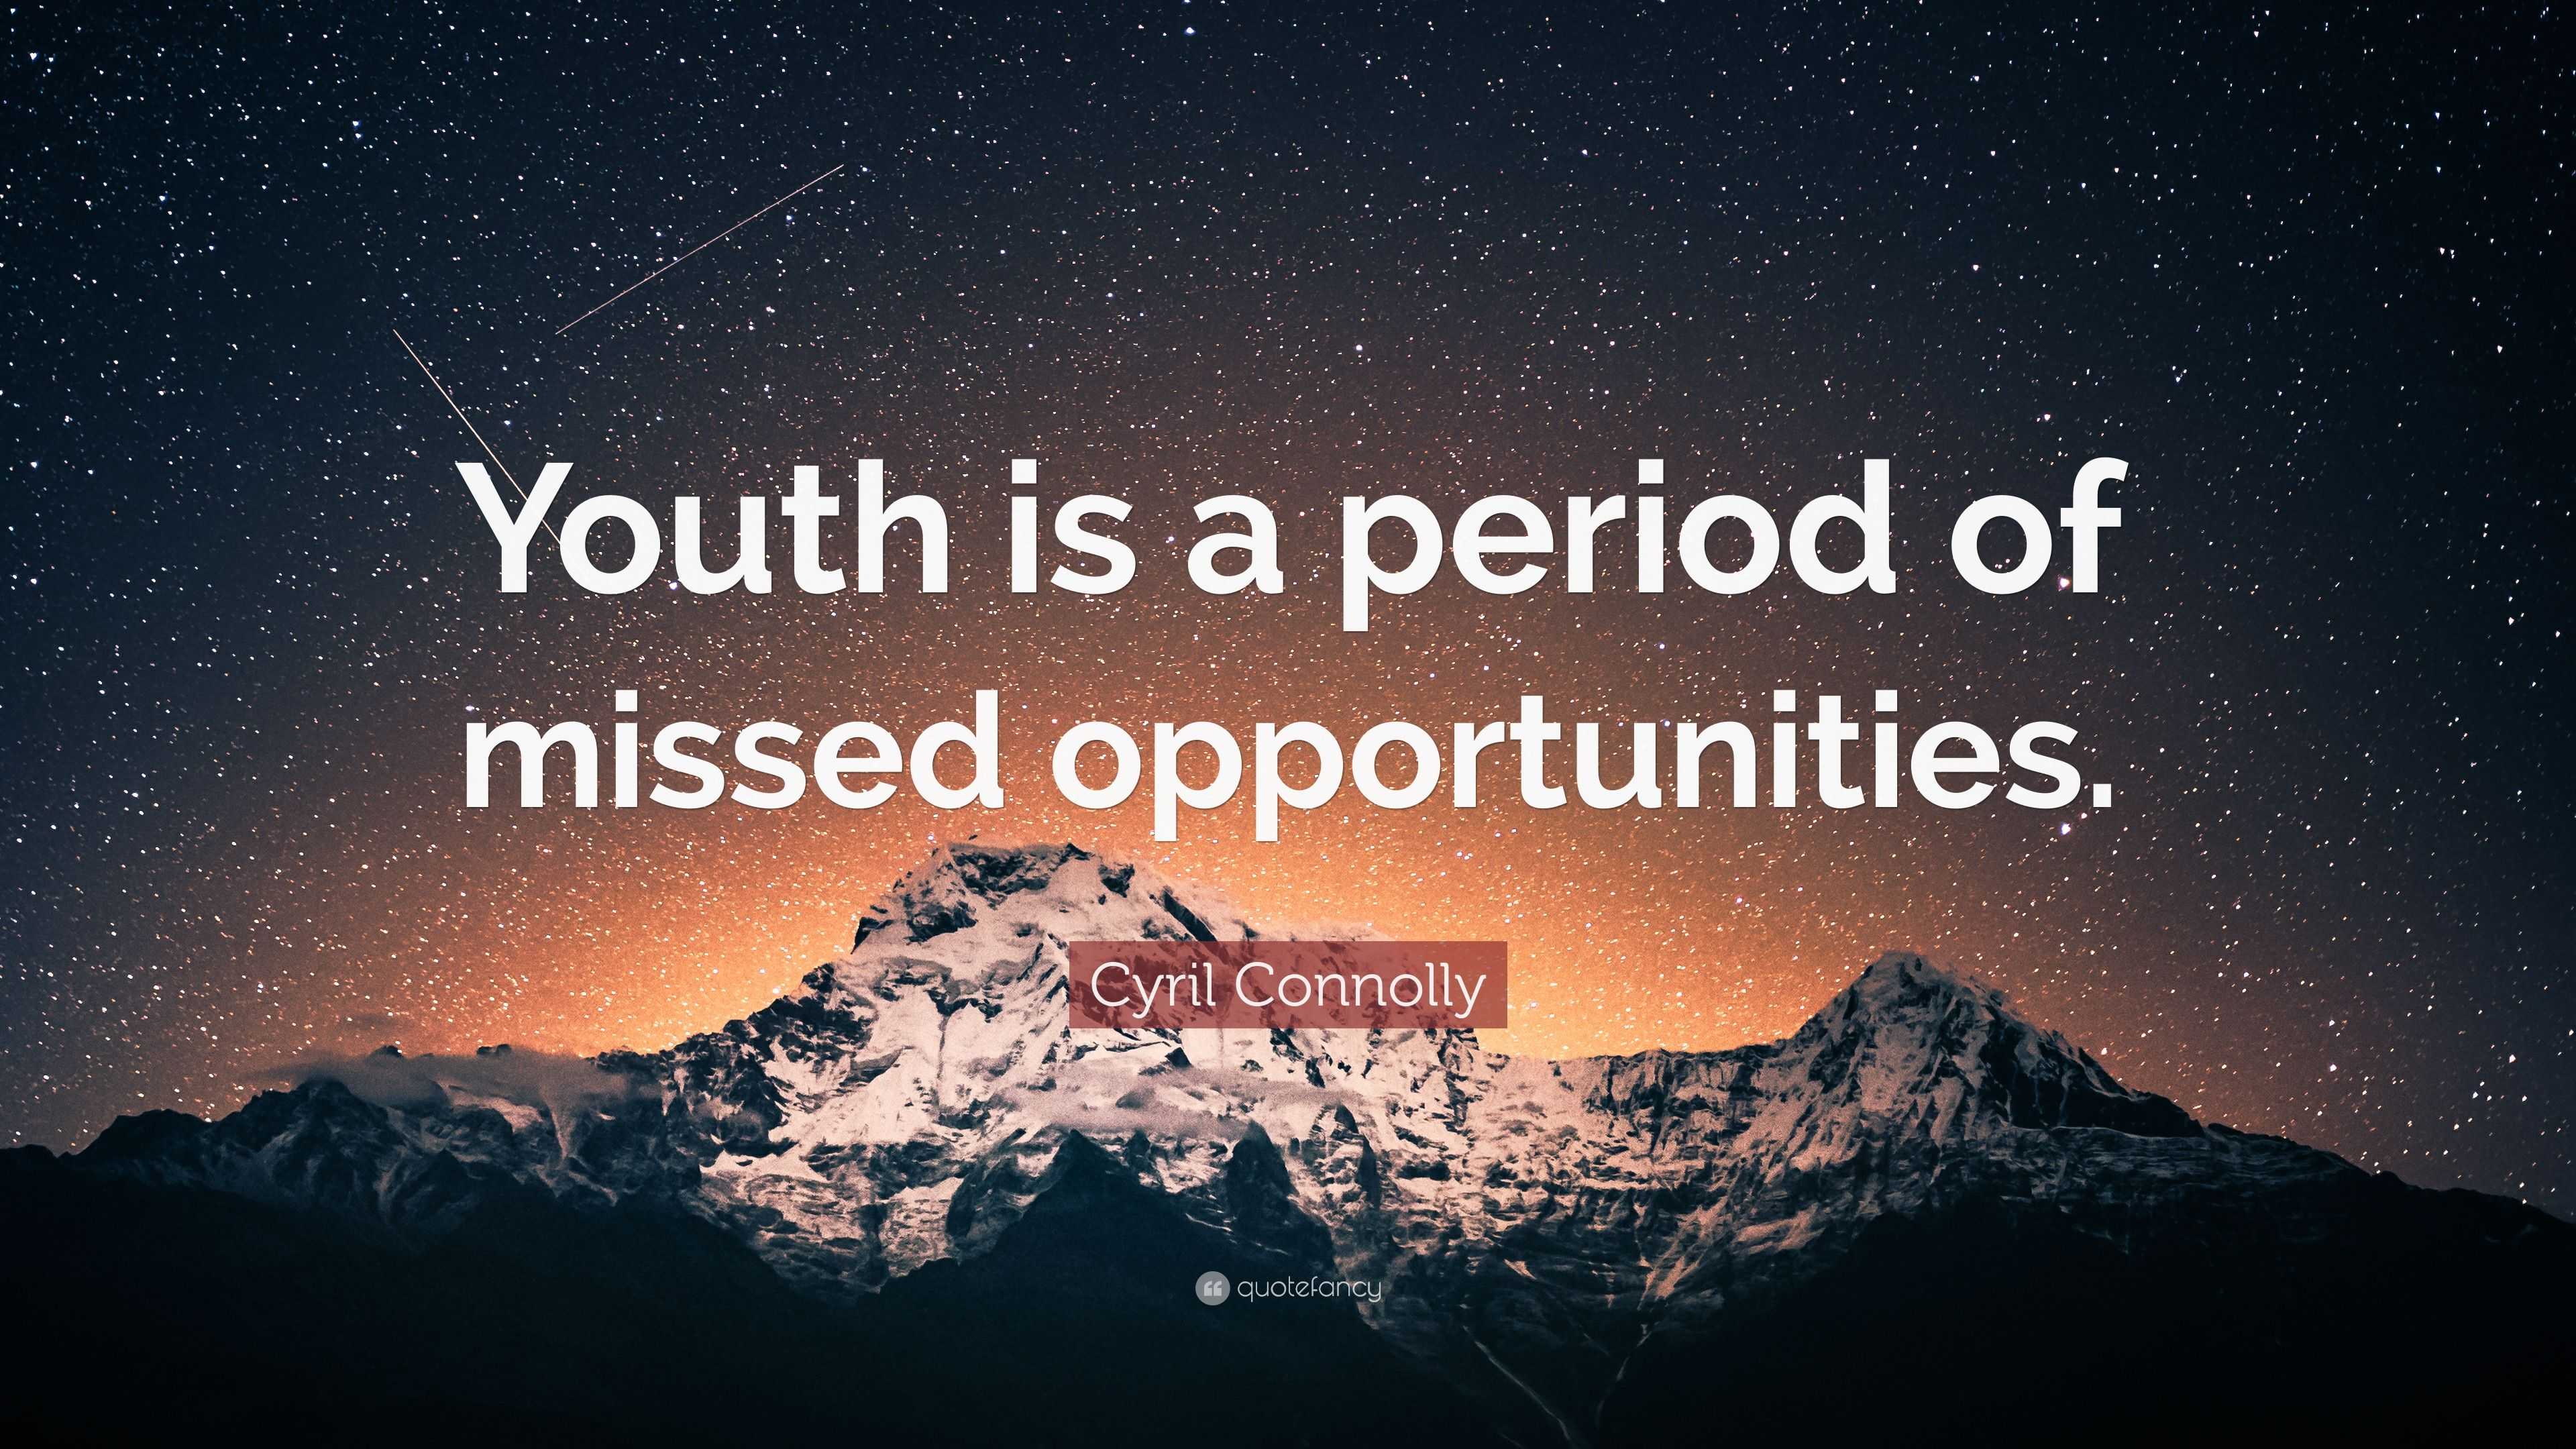 Cyril Connolly Quote “Youth is a period of missed opportunities ”